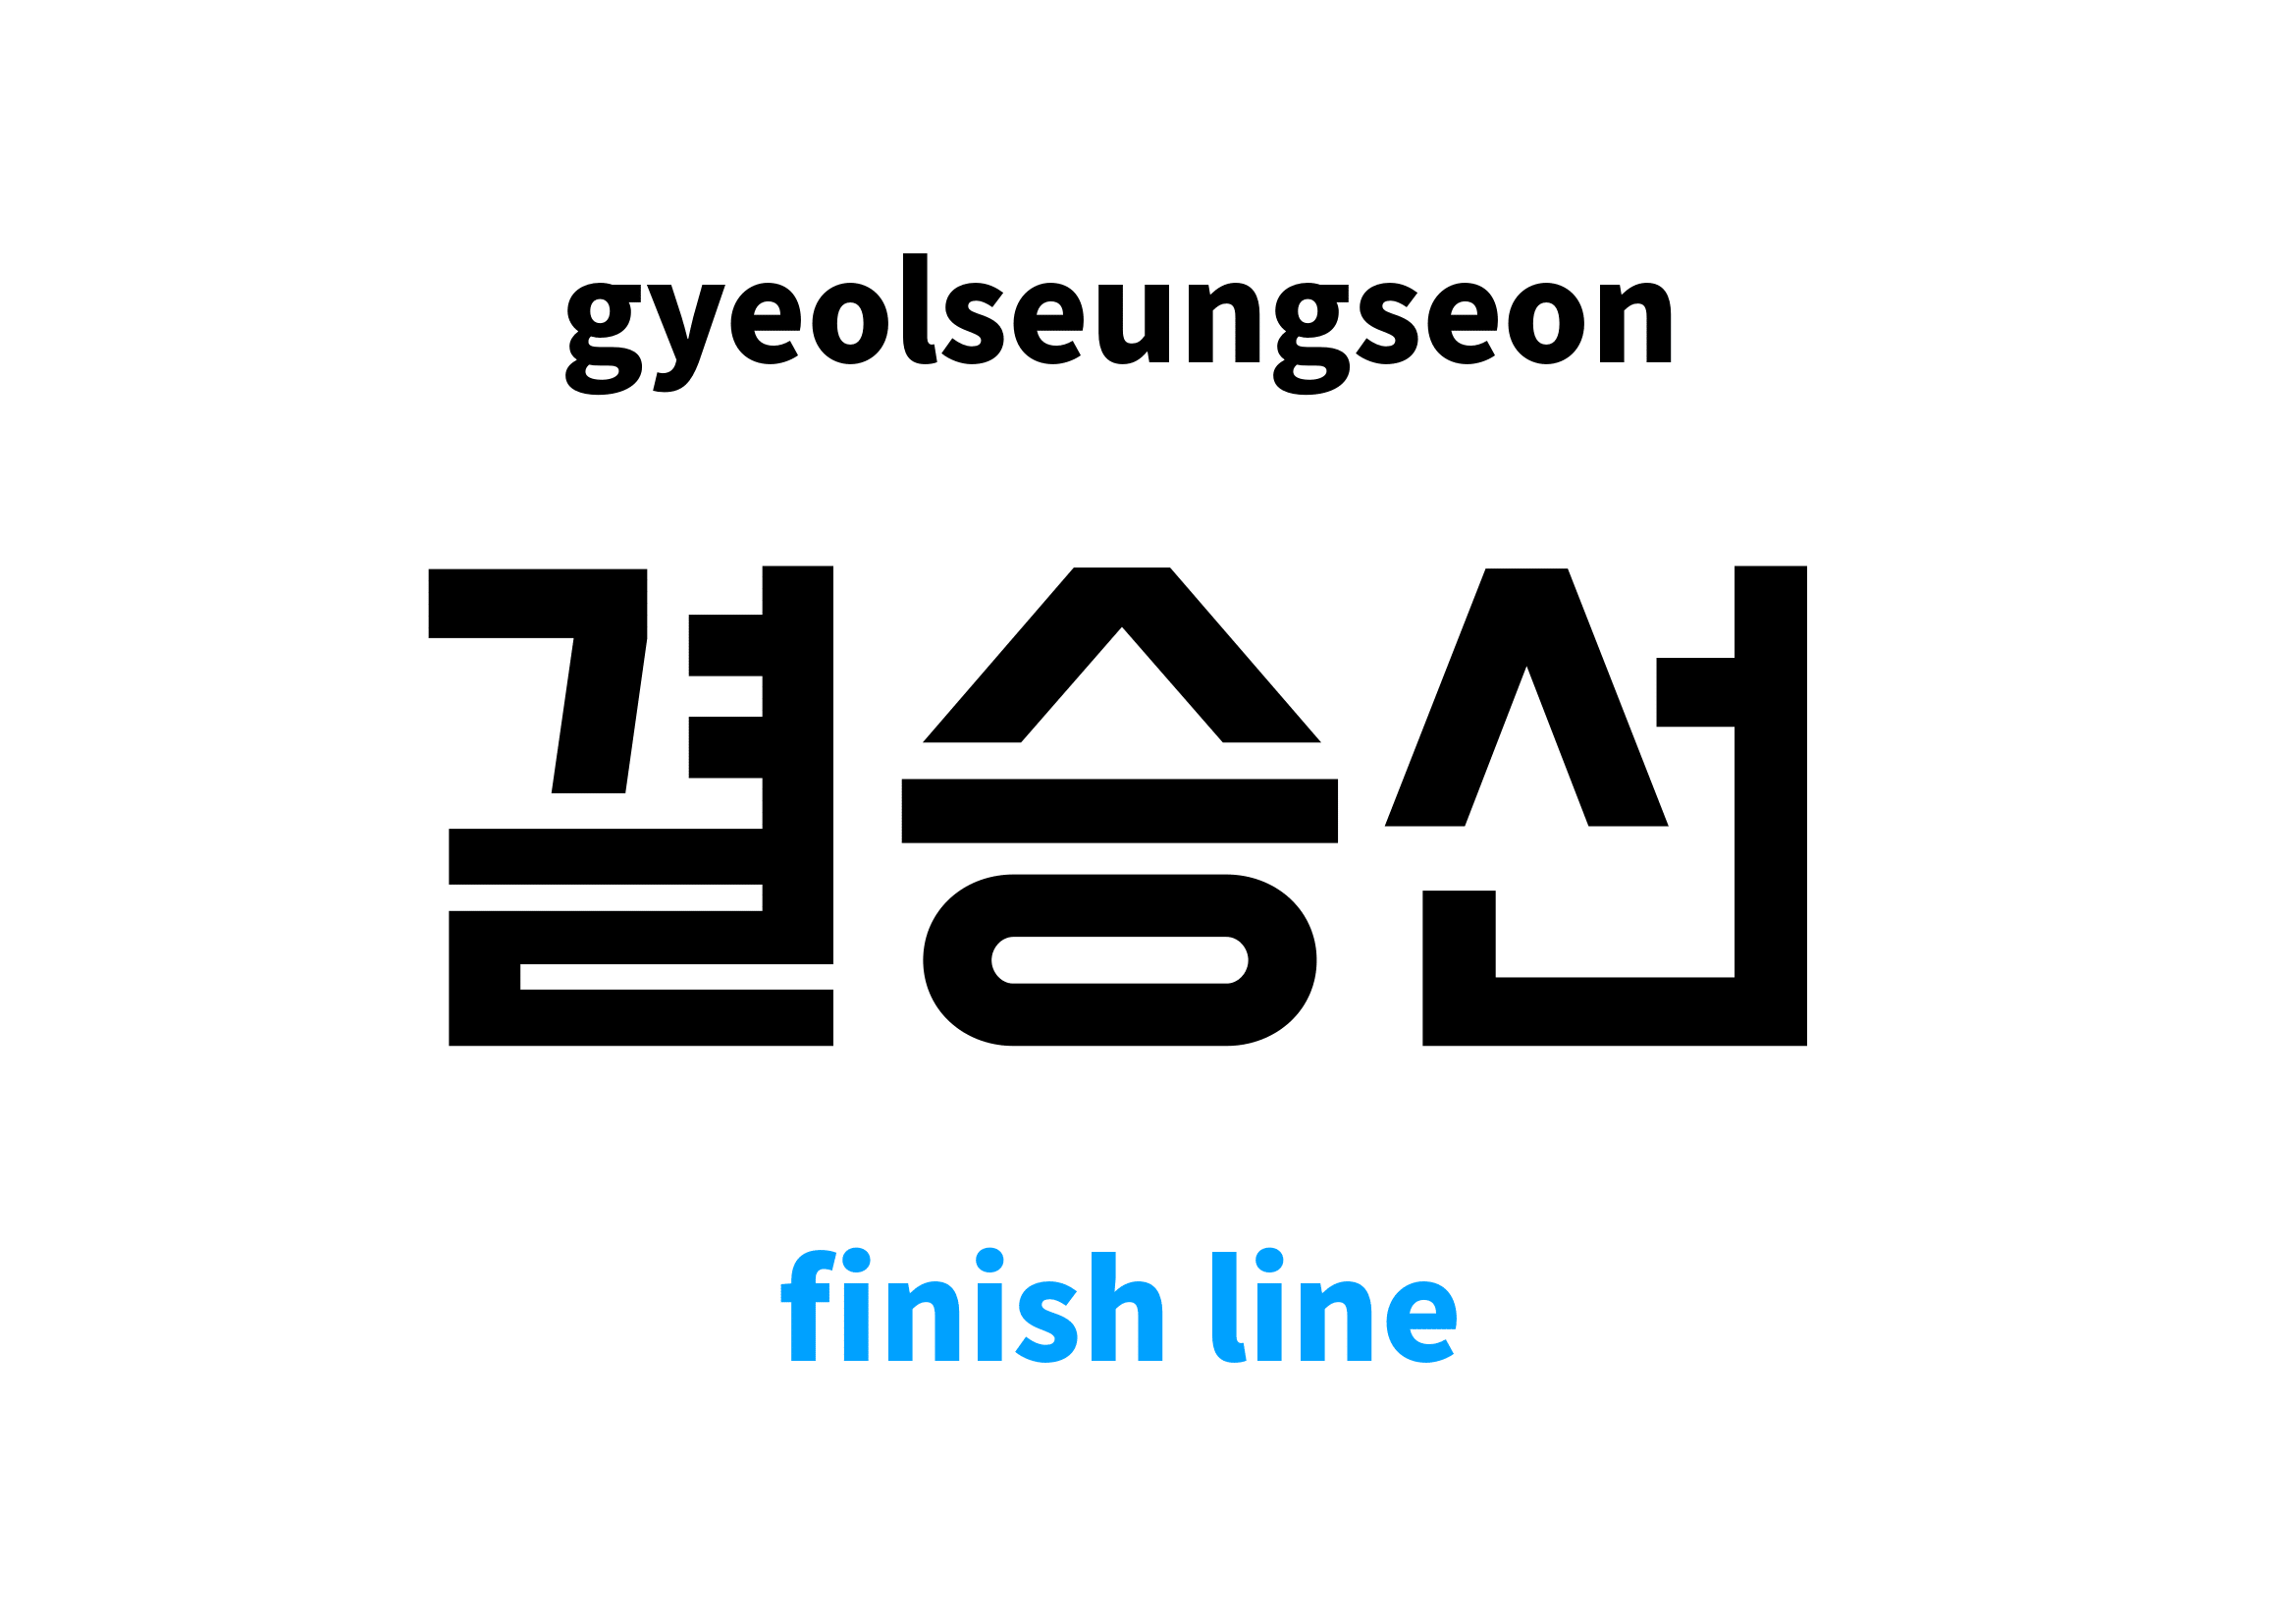 finish-line-in-korean-s-meaning-and-pronunciation